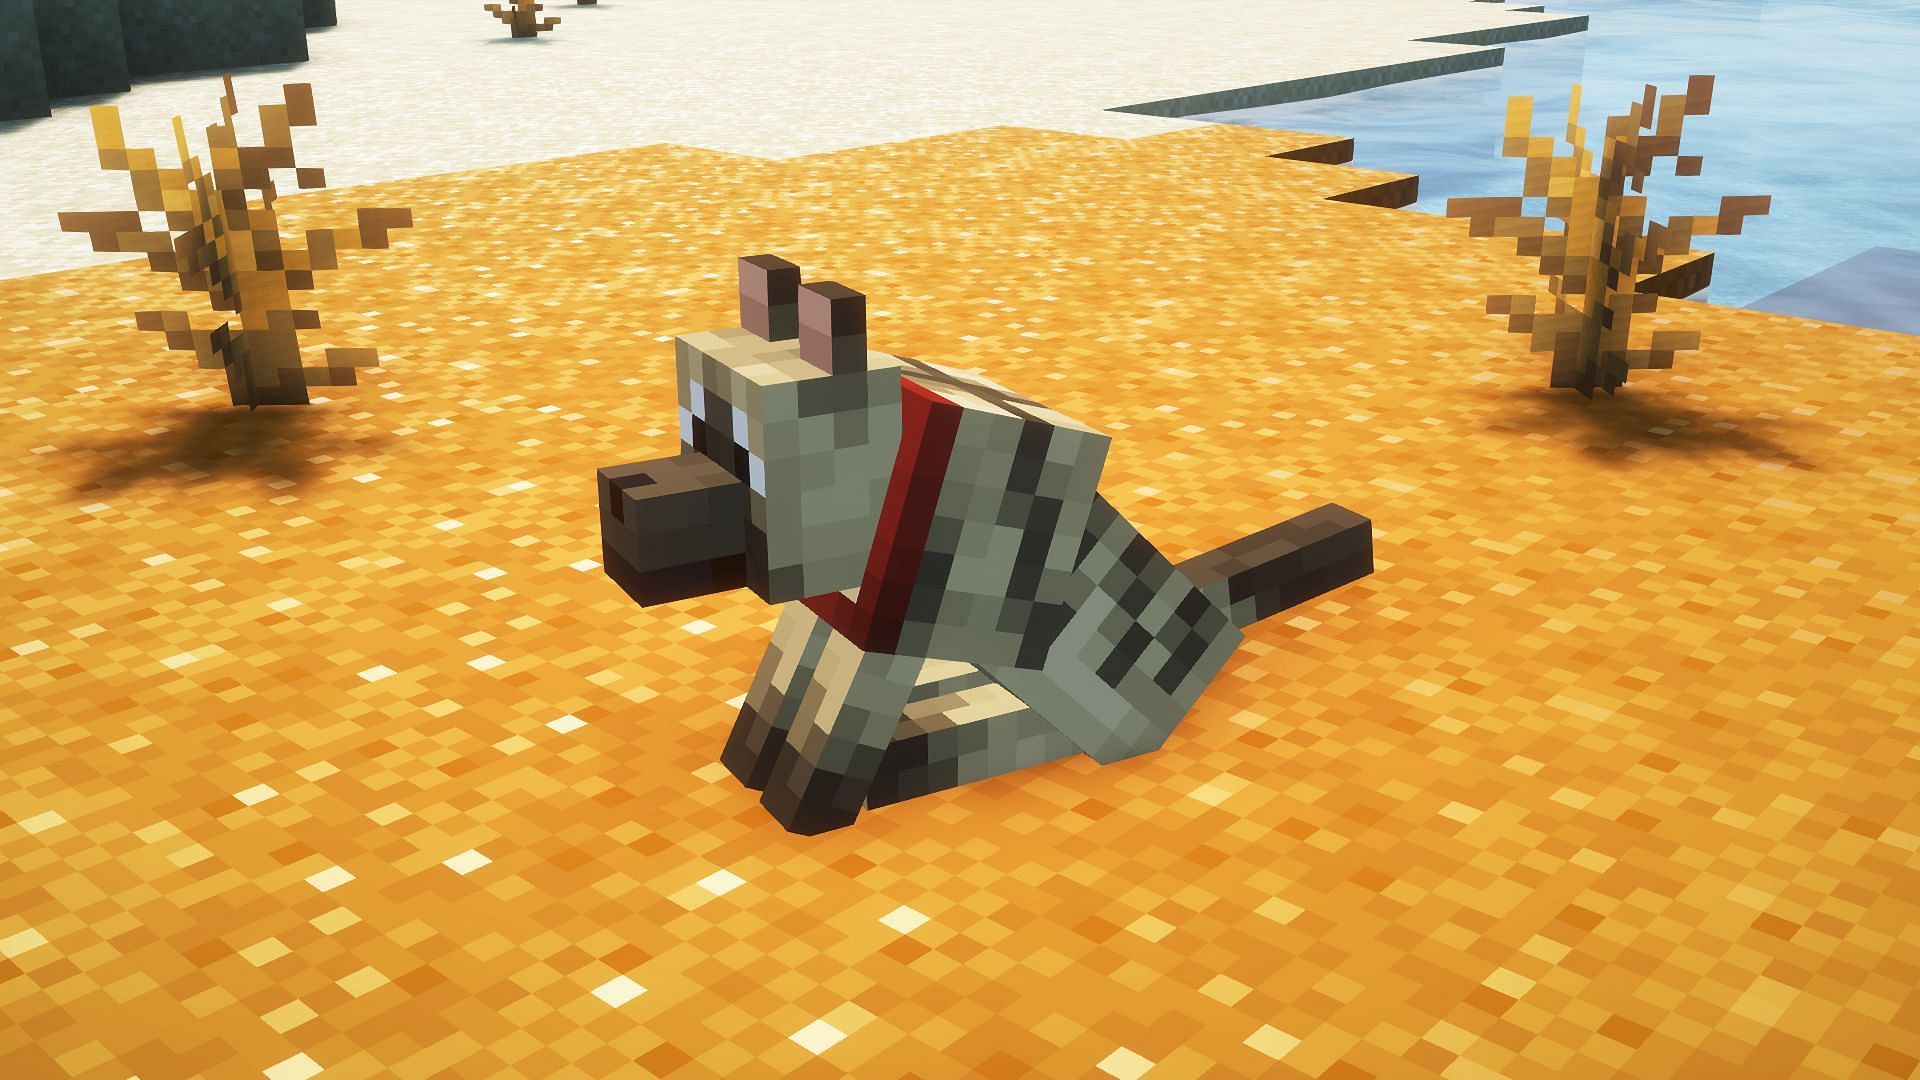 Striped wolf in the game (Image via Mojang)